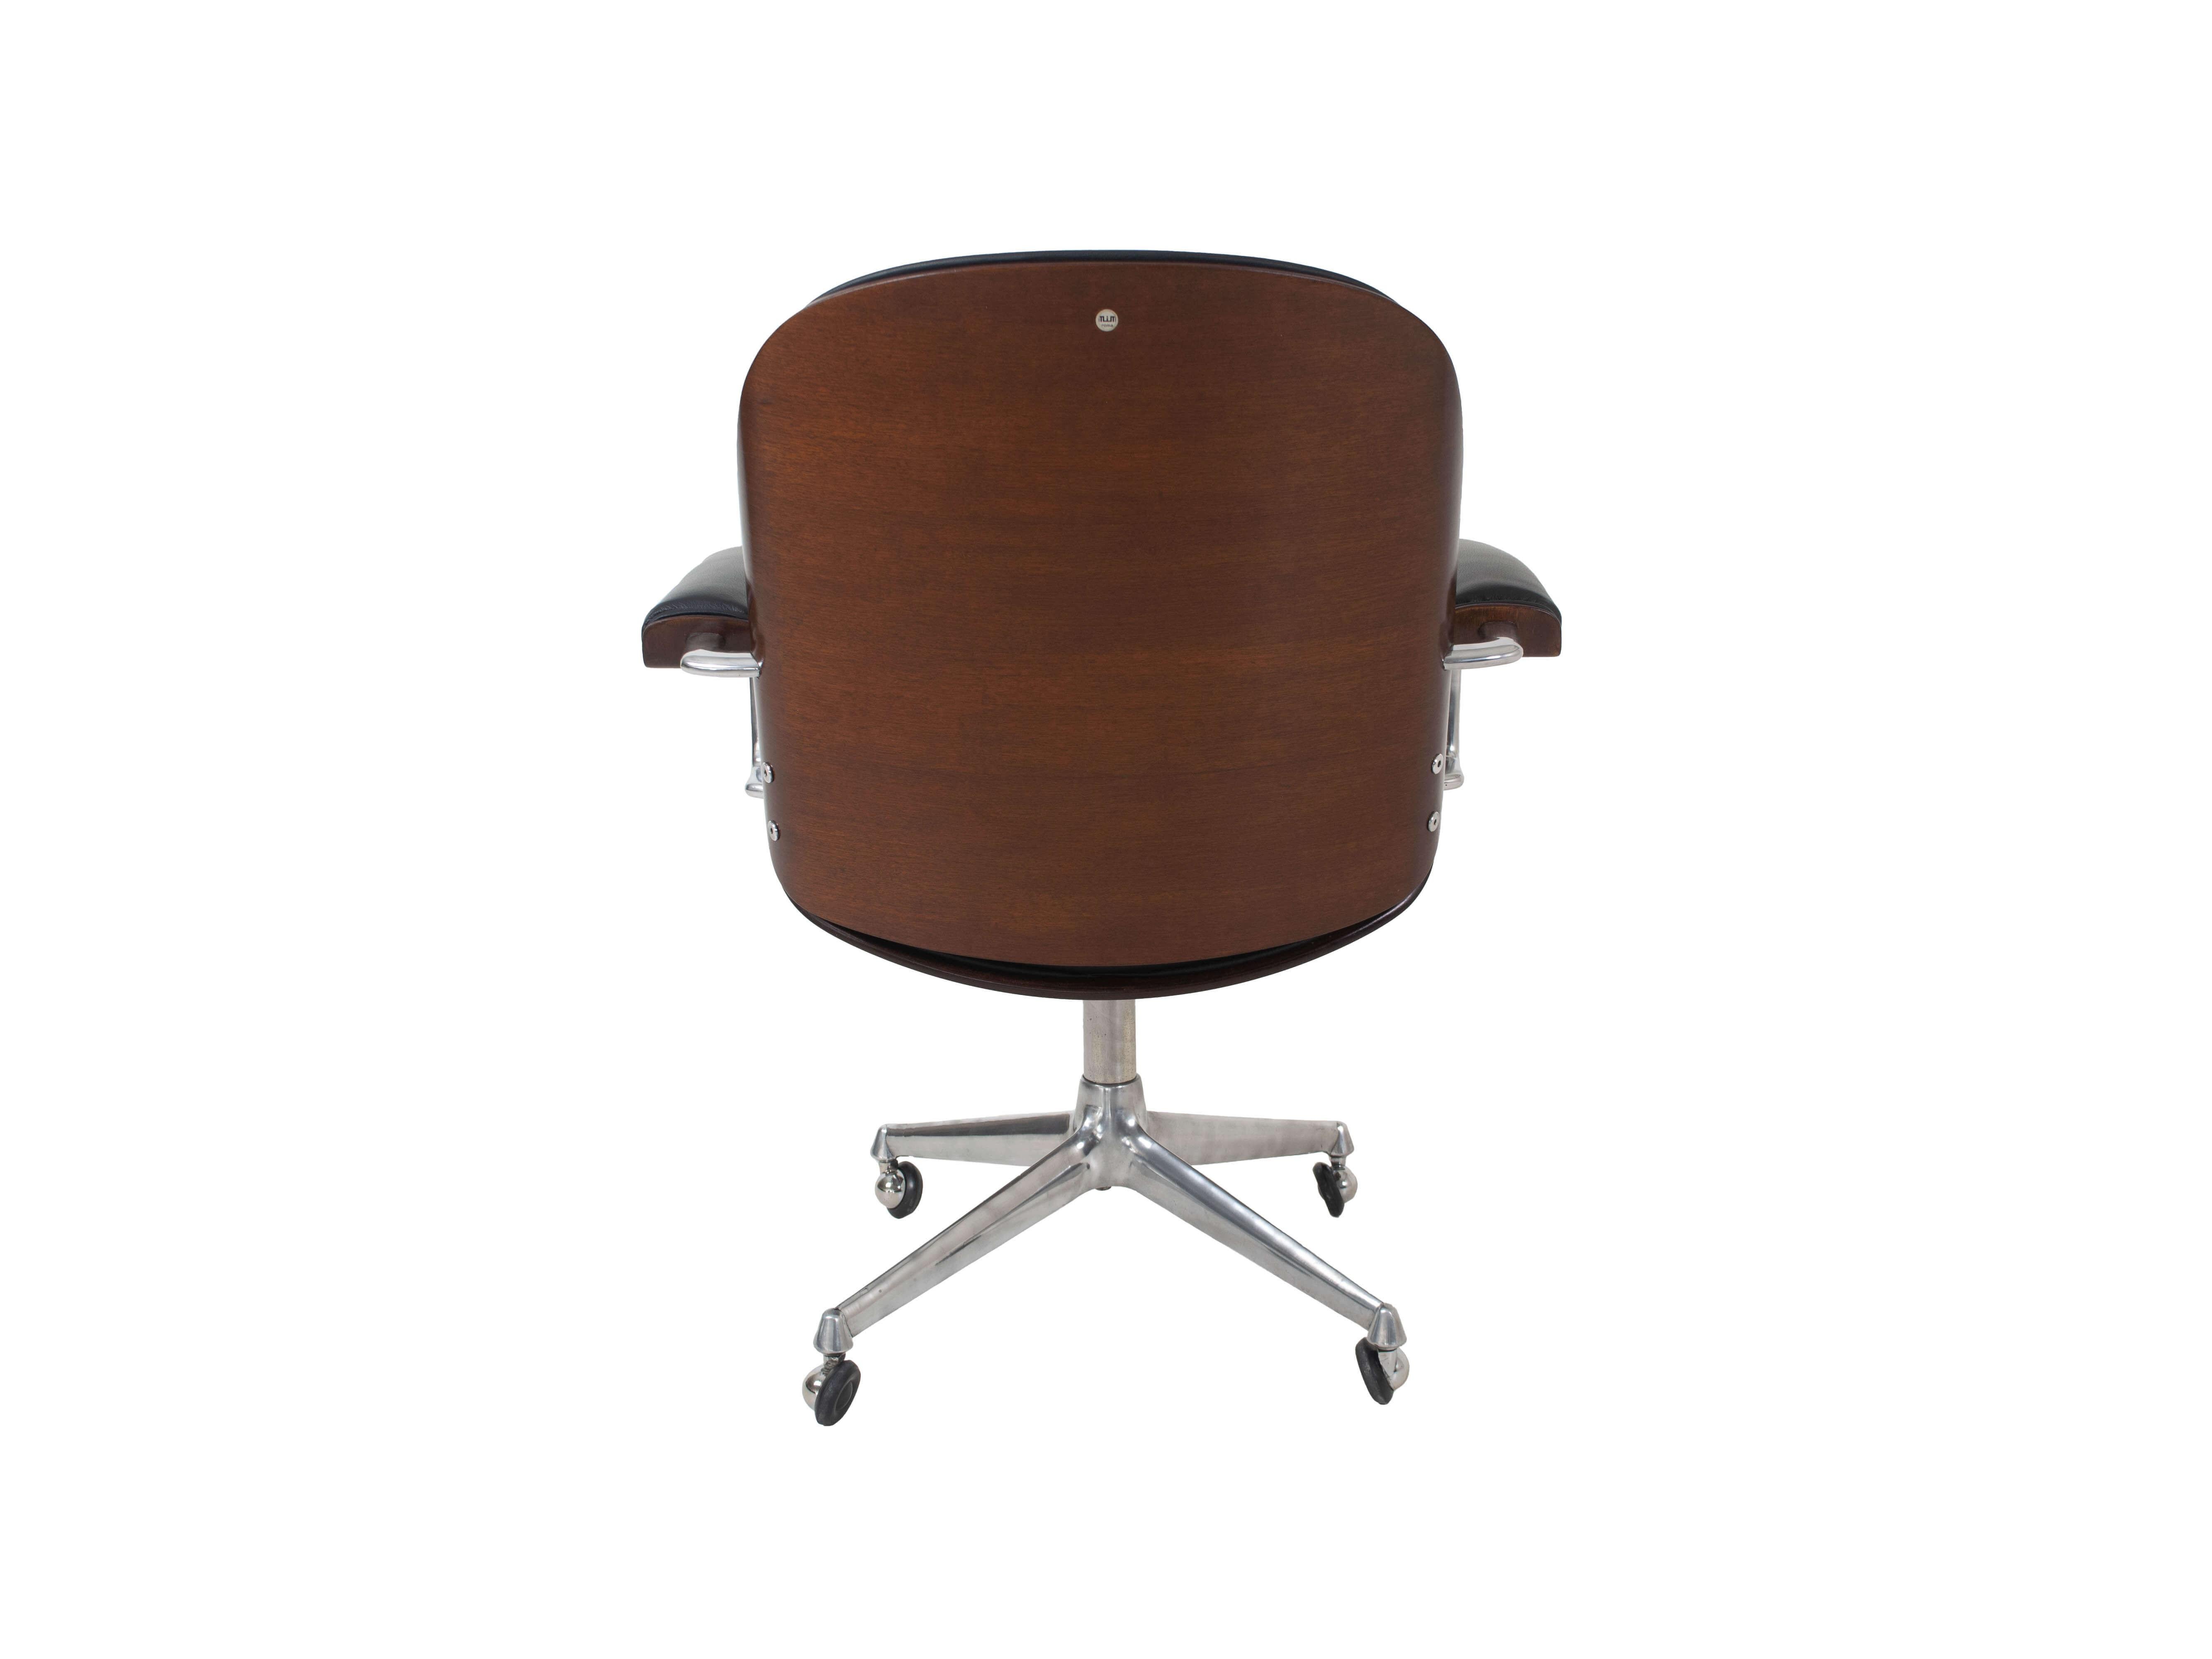 Italian Early Model Ico Parisi Desk Chair with Arm Rests by MIM Roma, Italy 1959